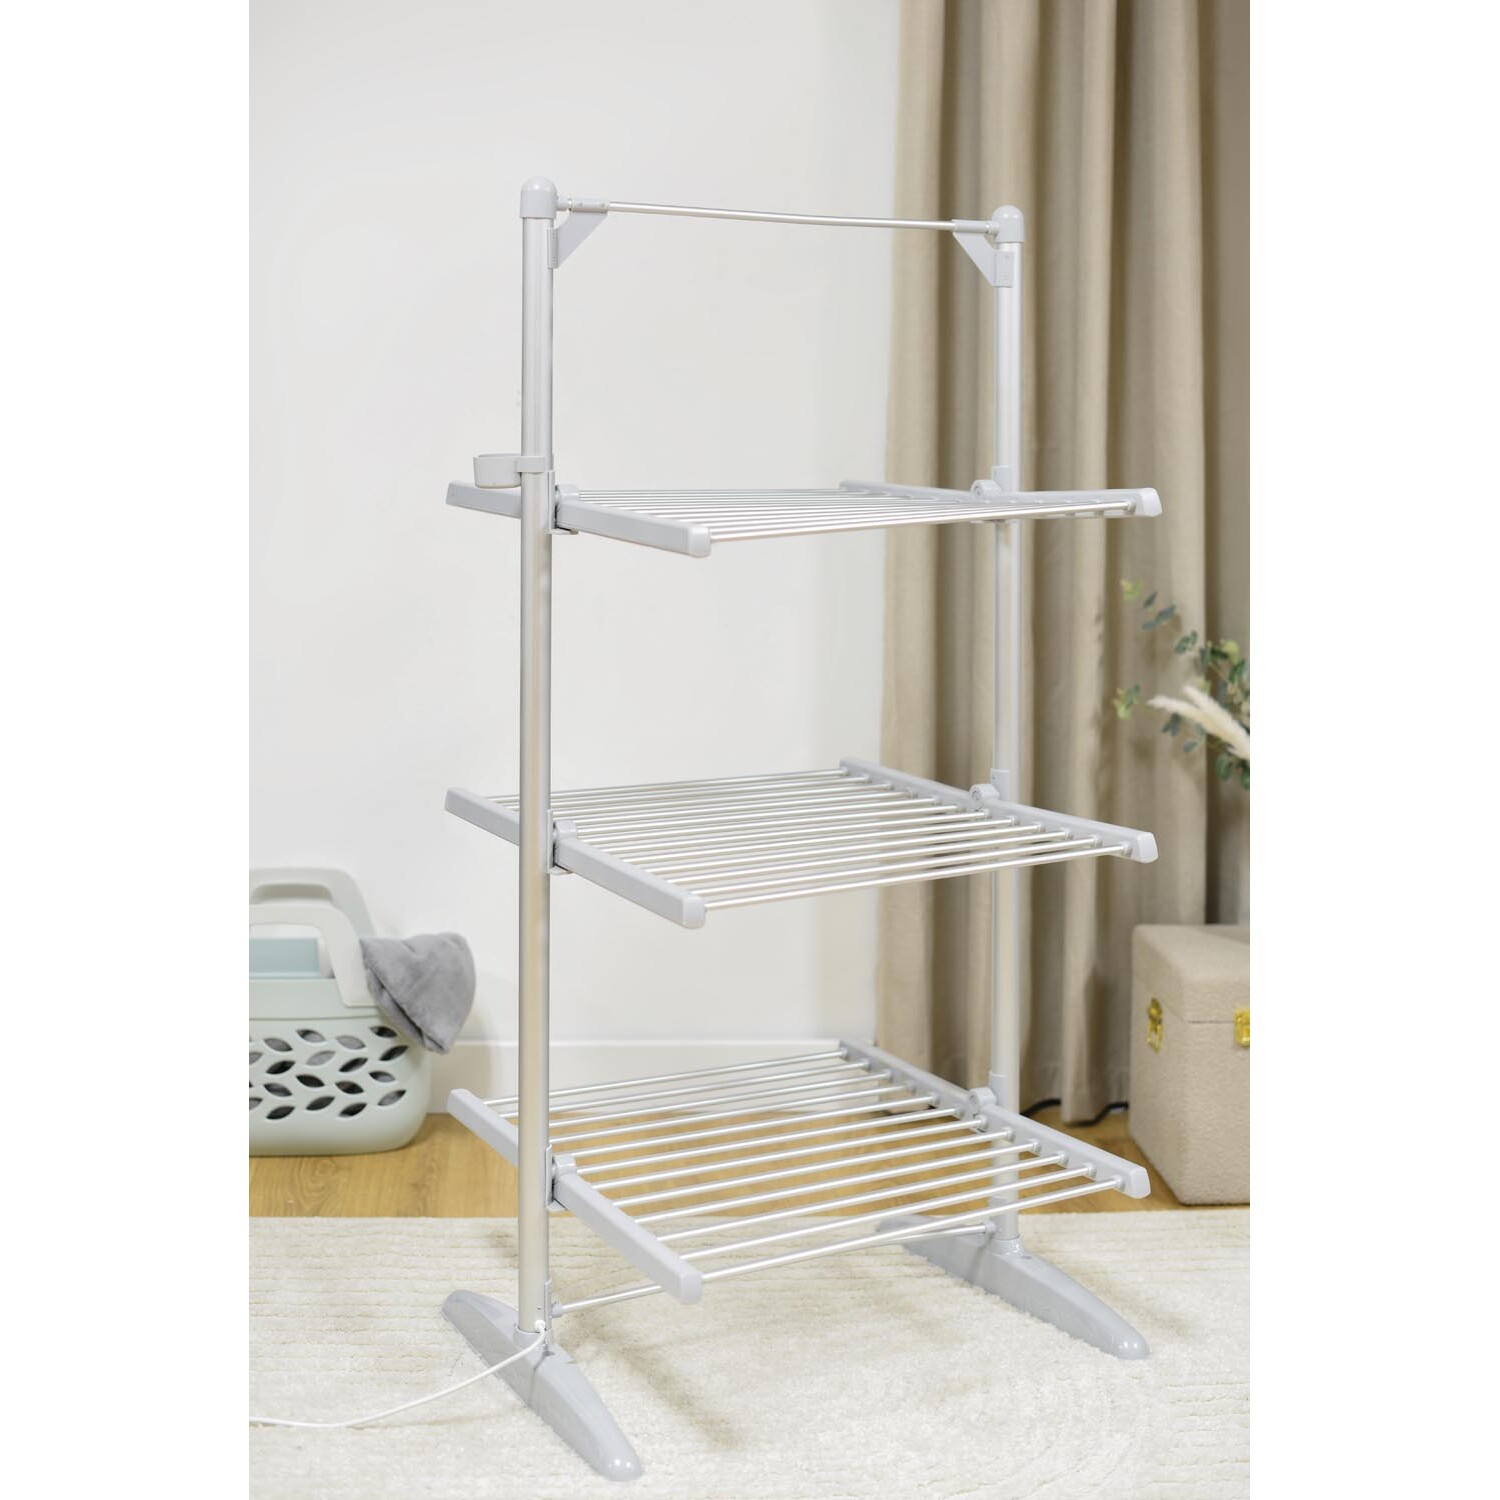 3 Tier Tower Heated Airer Image 3